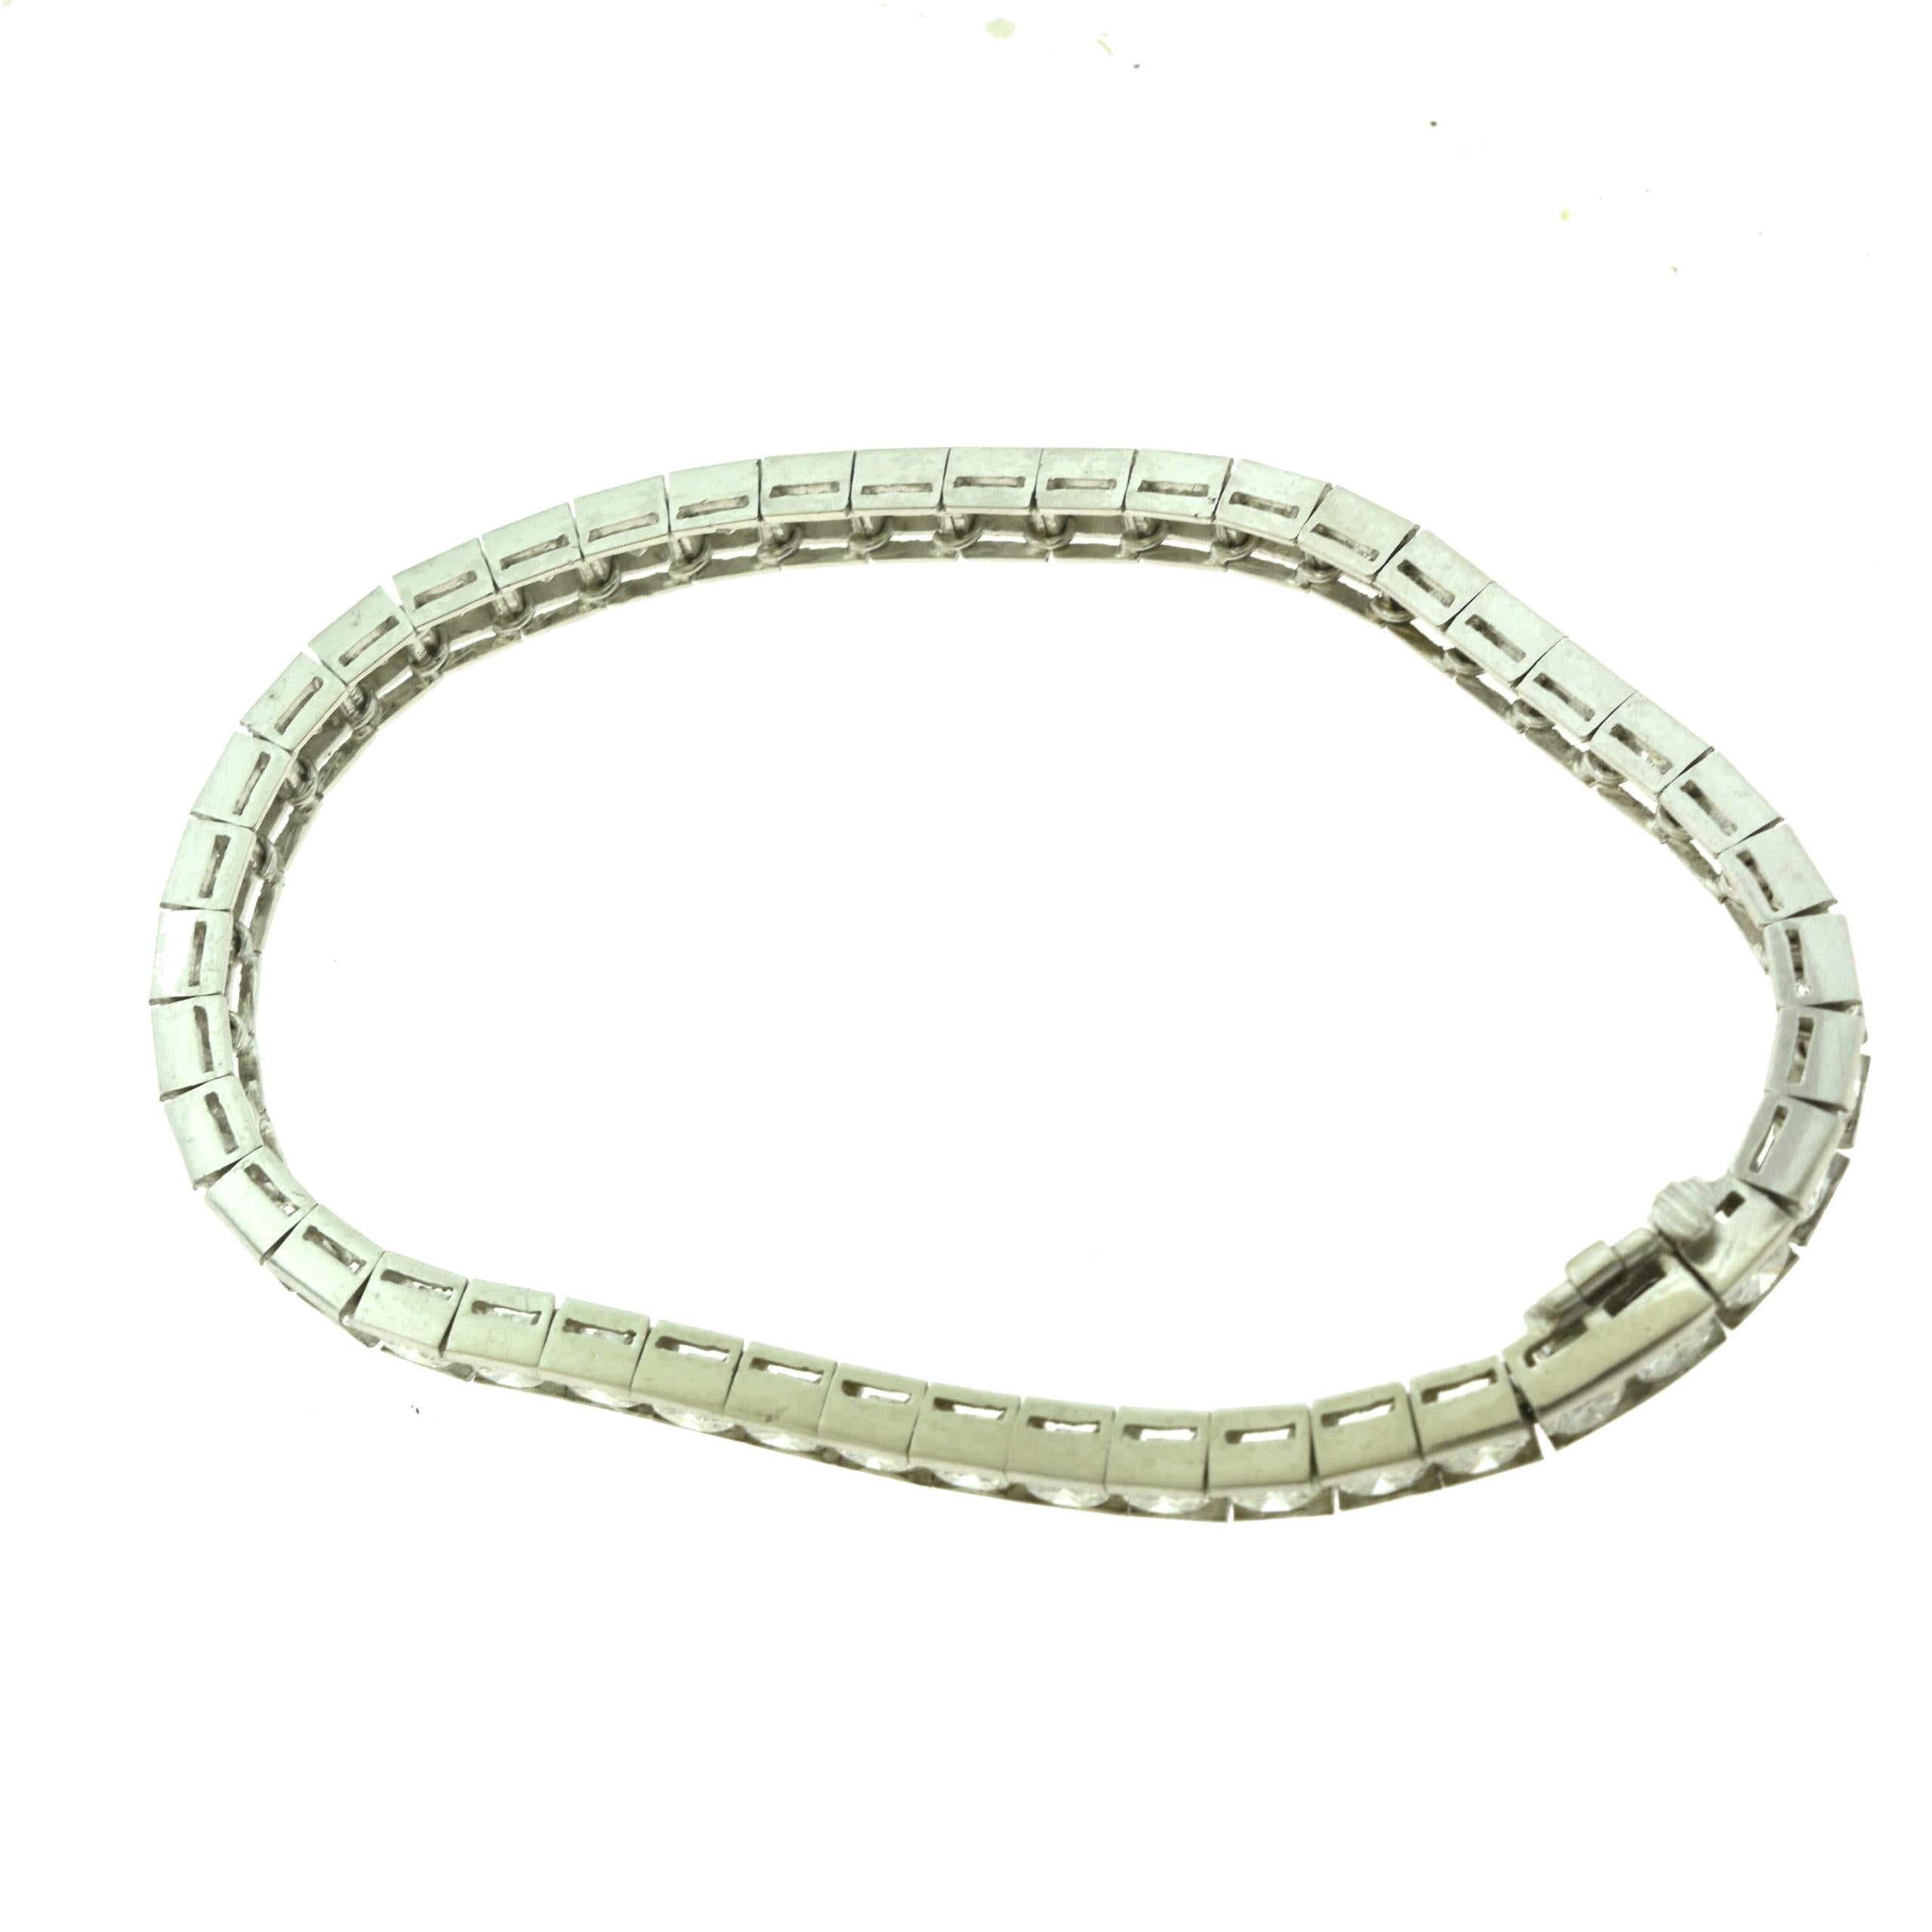 Brilliance Jewels, Miami
Questions? Call Us Anytime!
786,482,8100

Style: Box Chain Tennis Bracelet

Metal: Platinum

Metal Purity: 950

Stones: 44 Round Diamonds

Diamond Color: G - H

Diamond Clarity: VVS2

Total Carat Weight: approx. 8.8